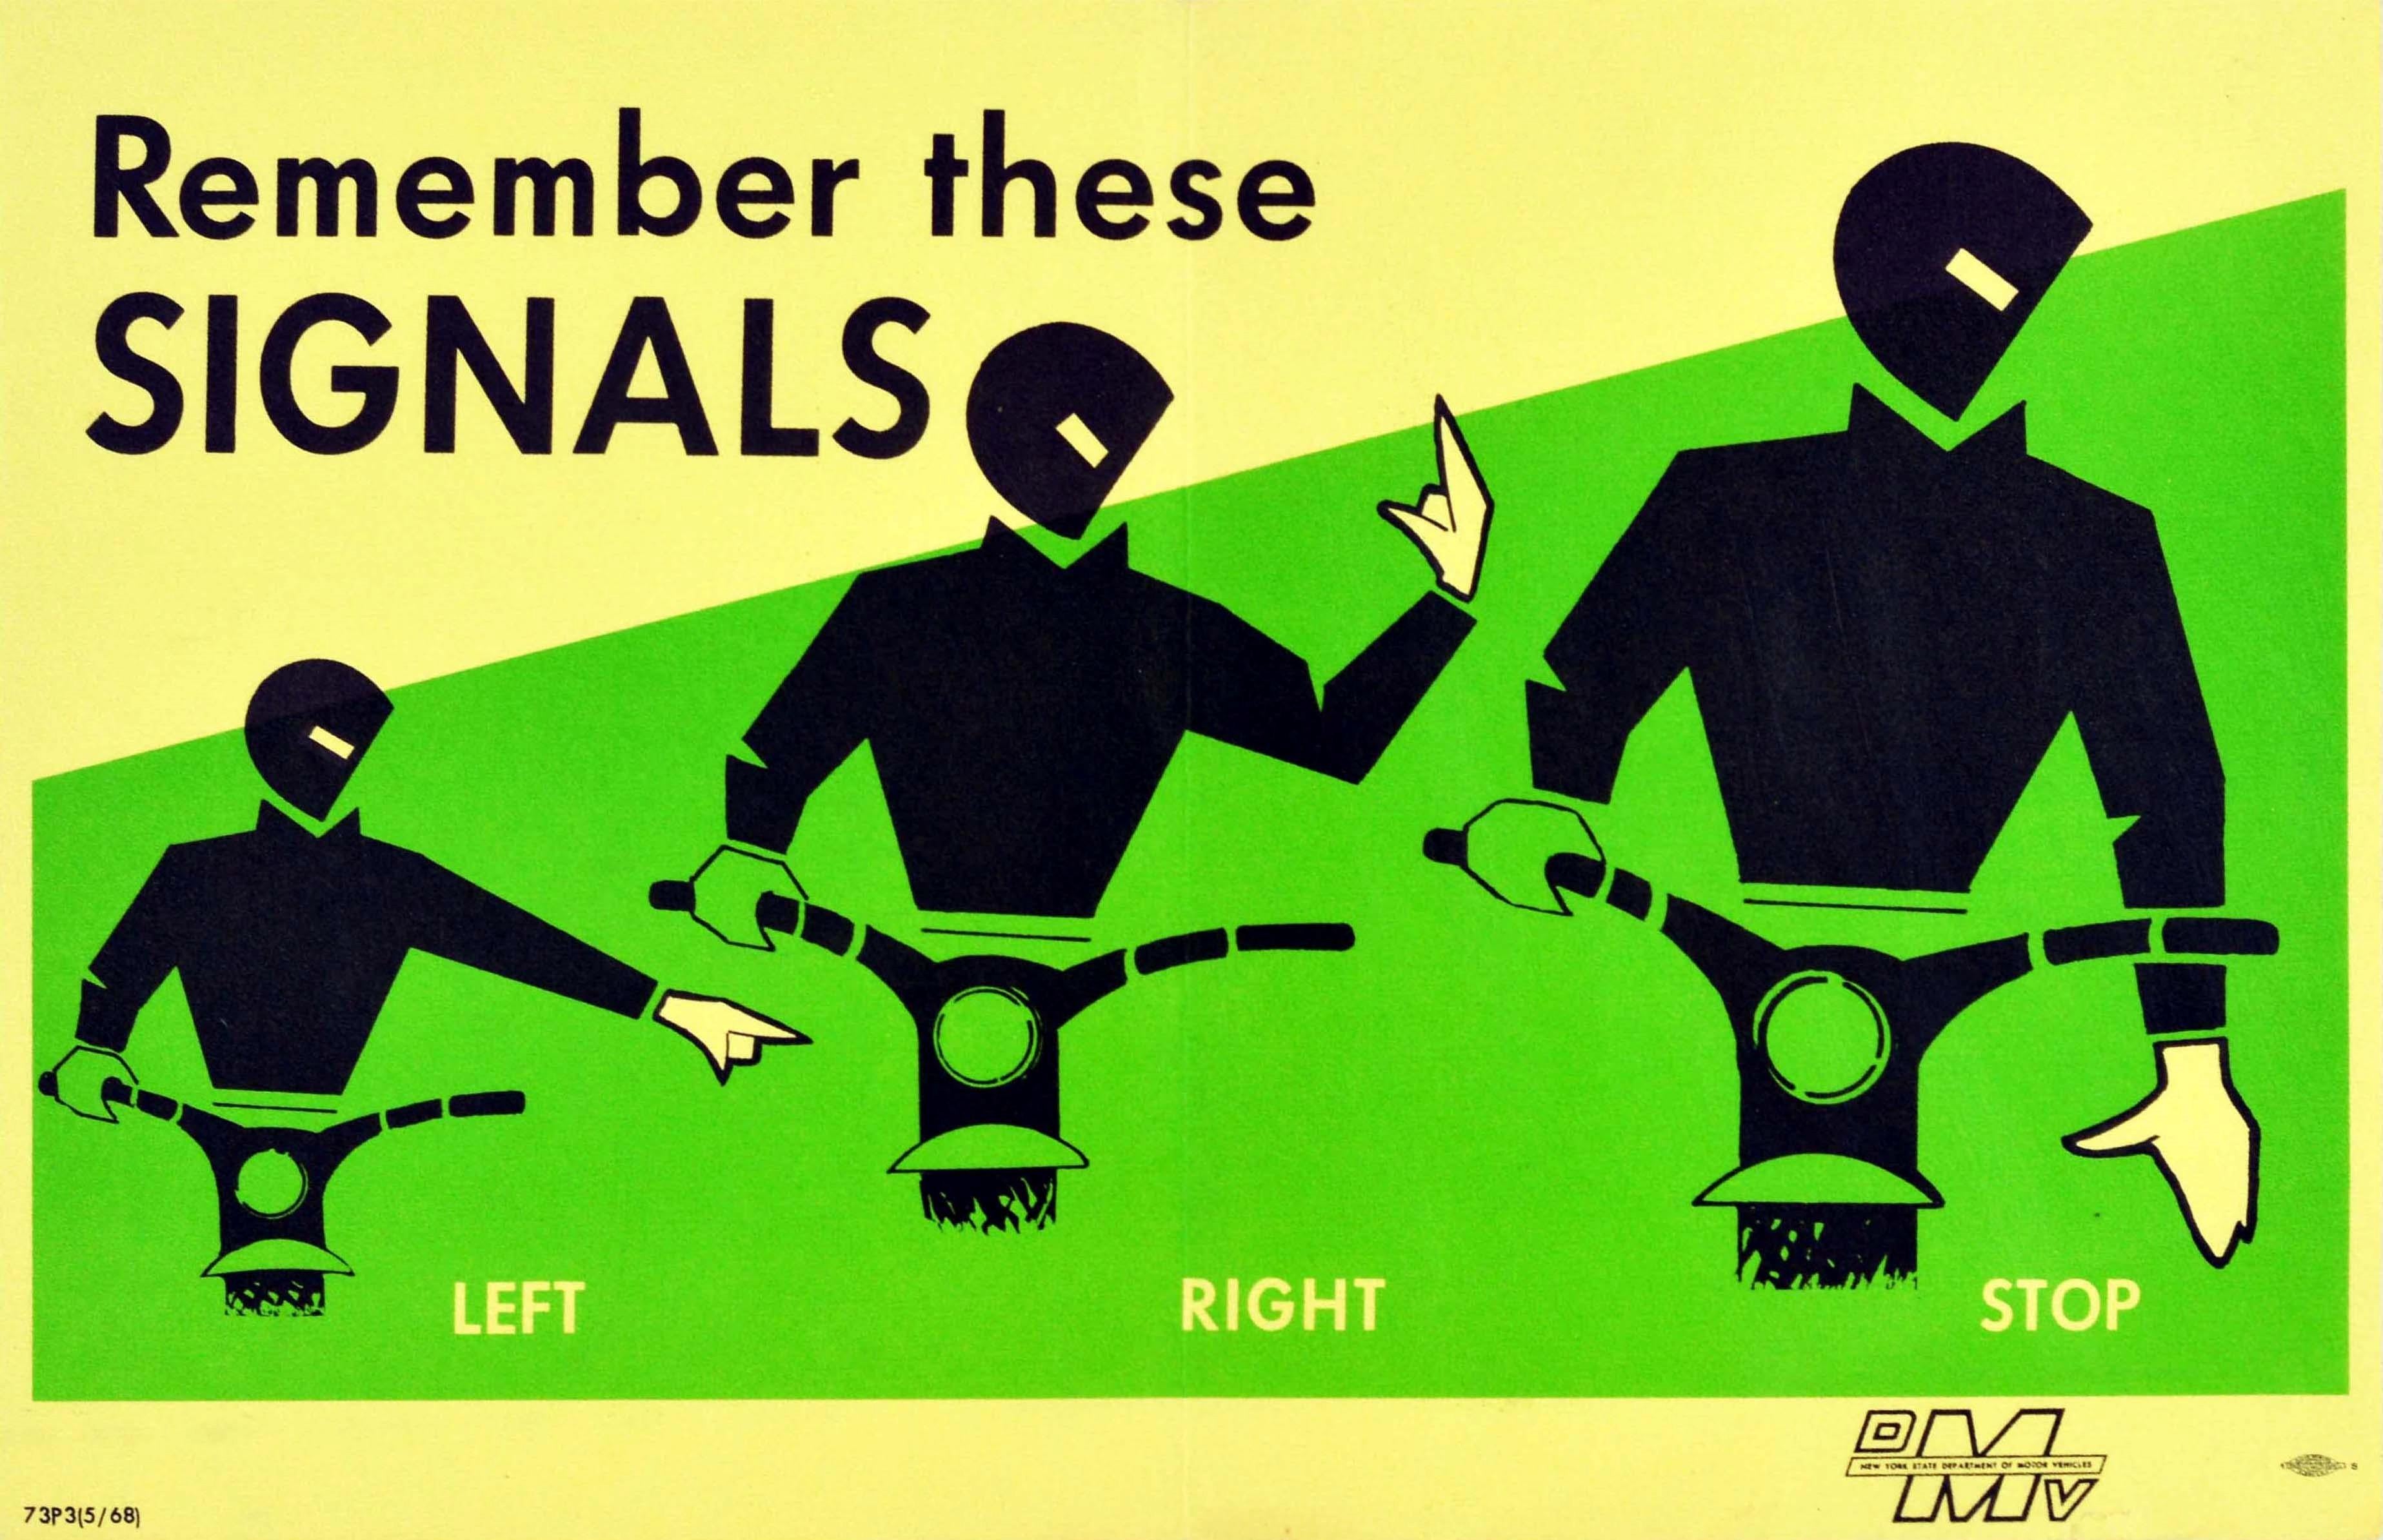 Unknown Print - Original Vintage Road Safety Poster Remember These Signals Motorcycle Driving 